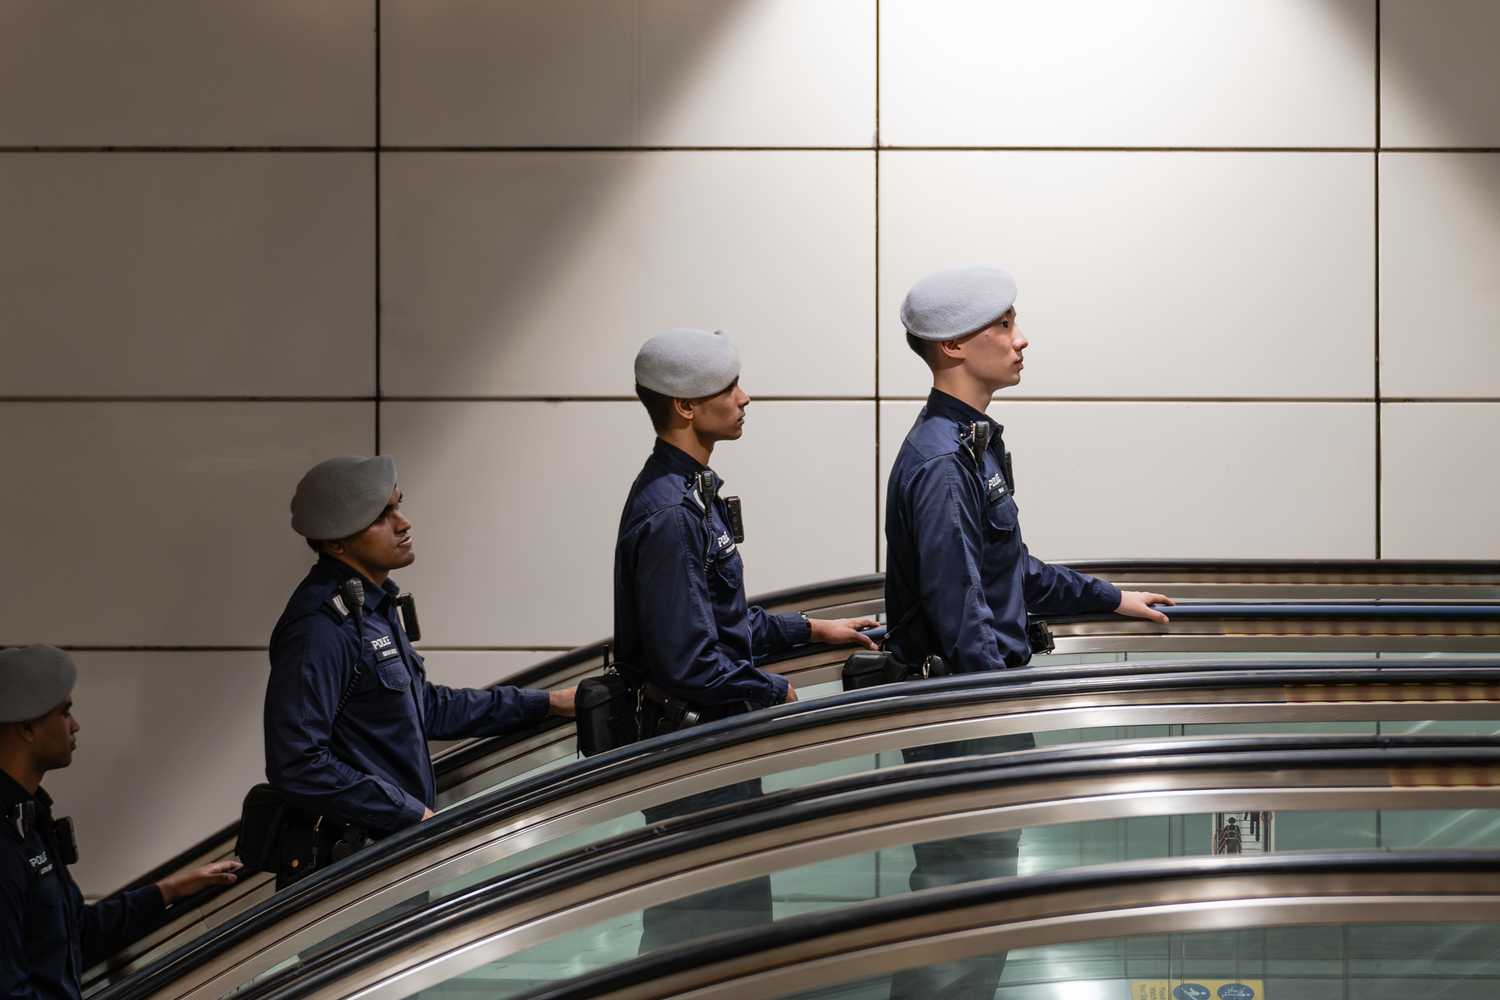 four transcom officer in blue uniform and grey beret, riding up an escalator, half appearing on the platform level in sync to the right